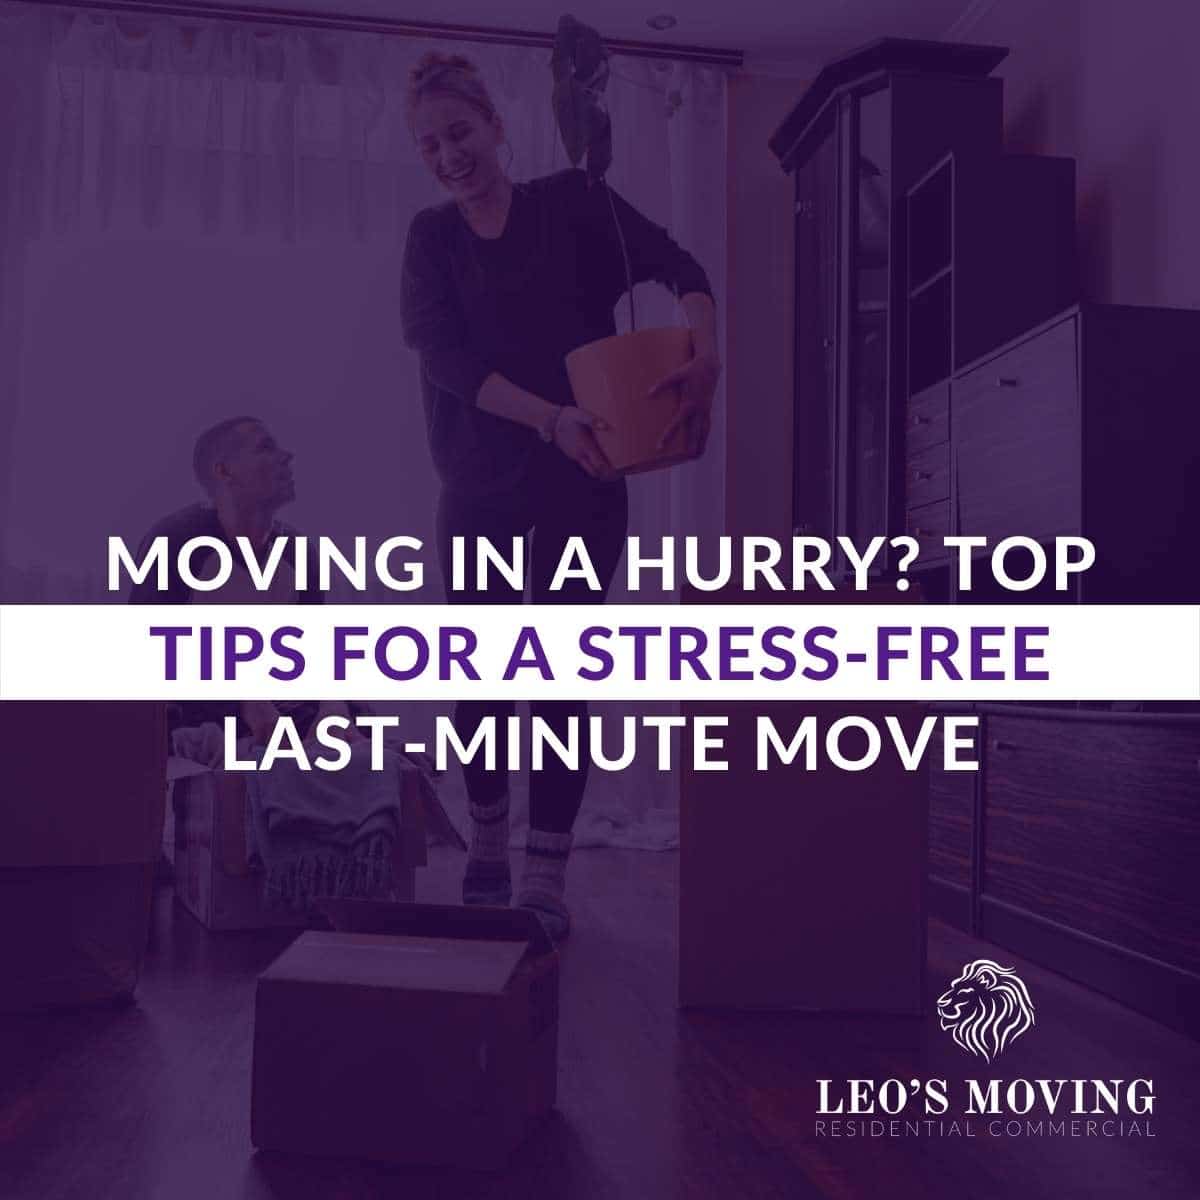 Moving In a Hurry Top Tips For a Stress-Free Last-Minute Move